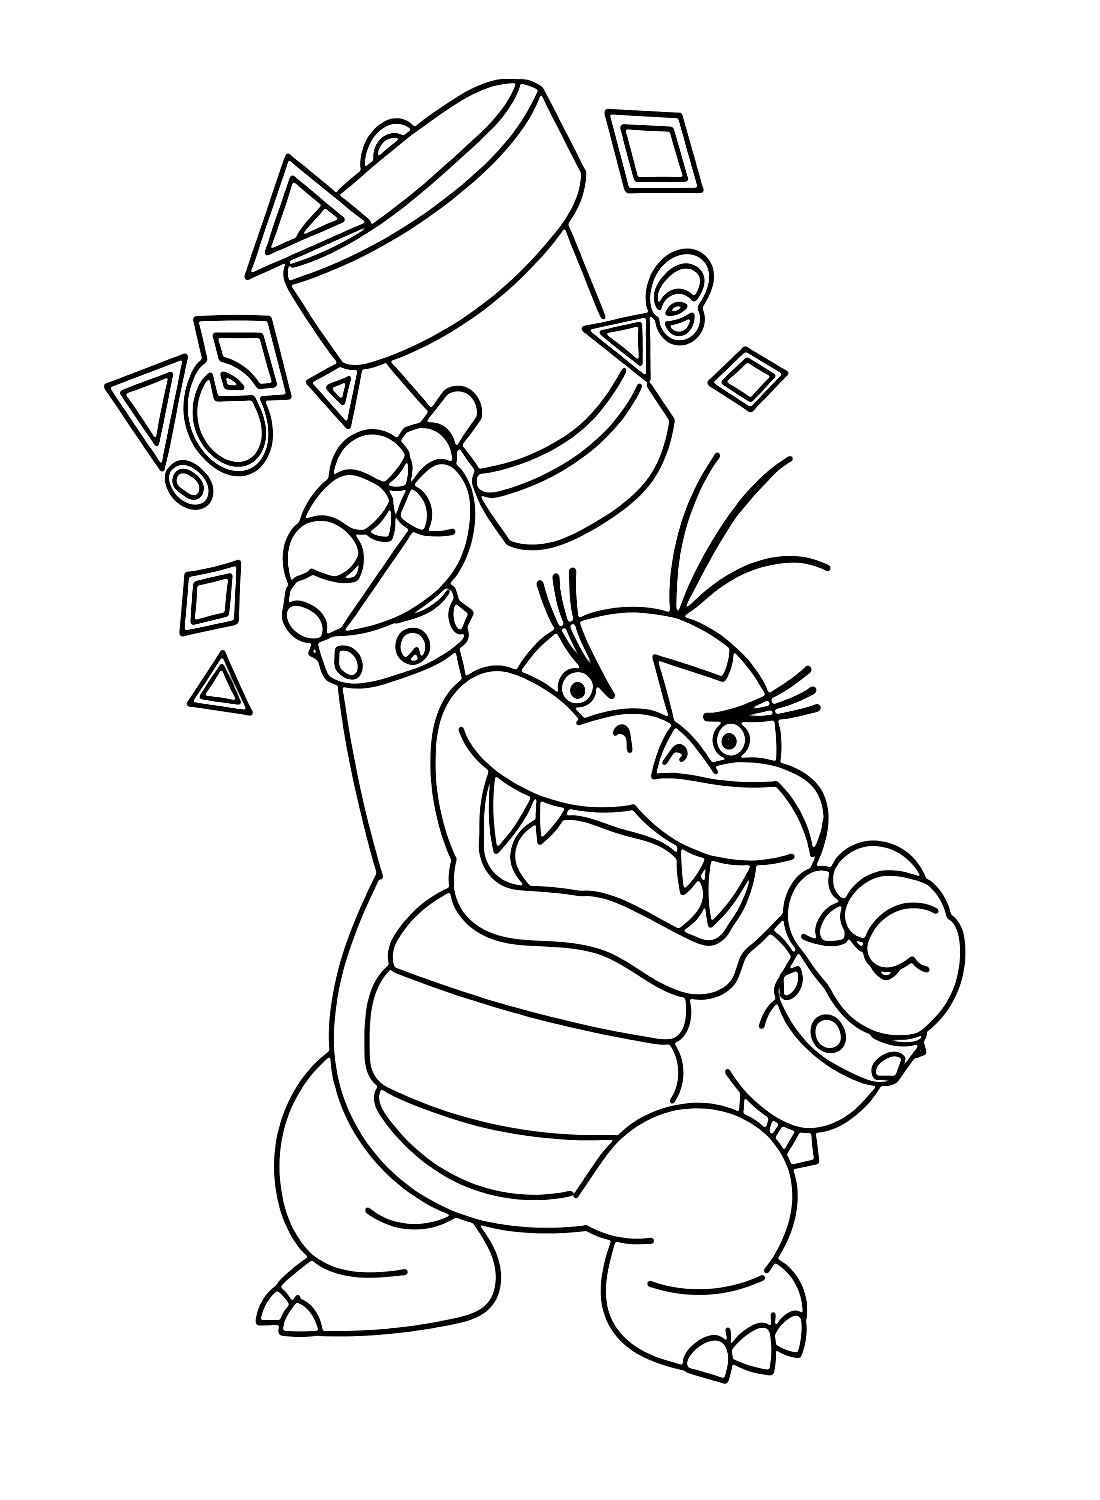 Morton of Koopalings Coloring Pages